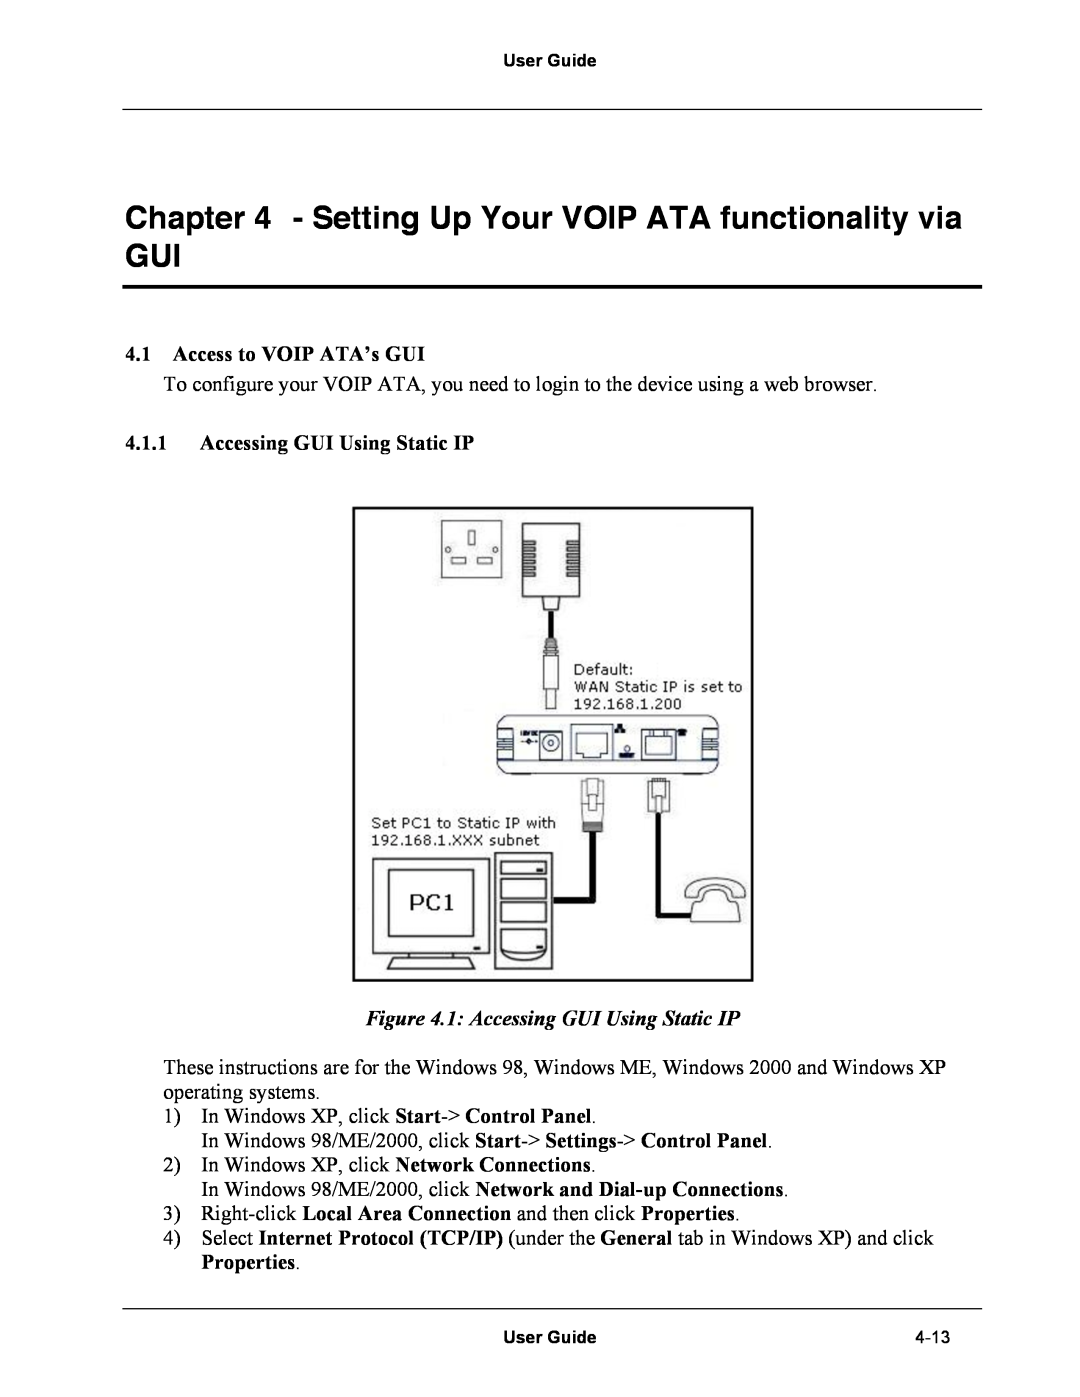 Netopia Network Adapater manual Setting Up Your VOIP ATA functionality via GUI, Access to VOIP ATA’s GUI 